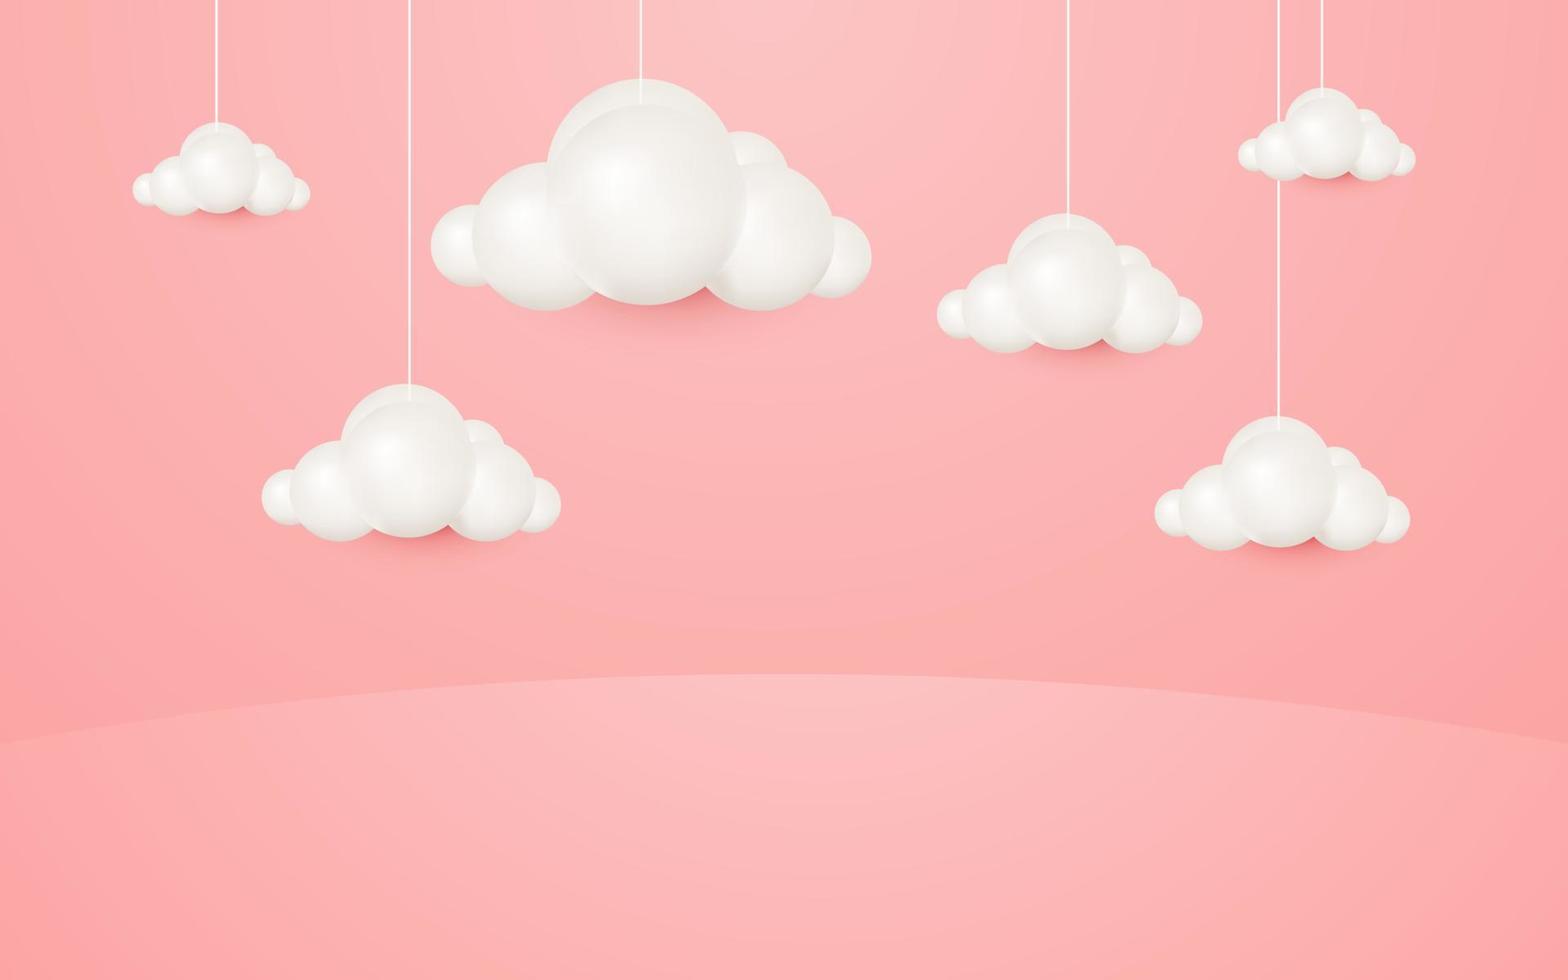 3d cartoon style hanging clouds on pastel pink background for product presentation mockup show vector